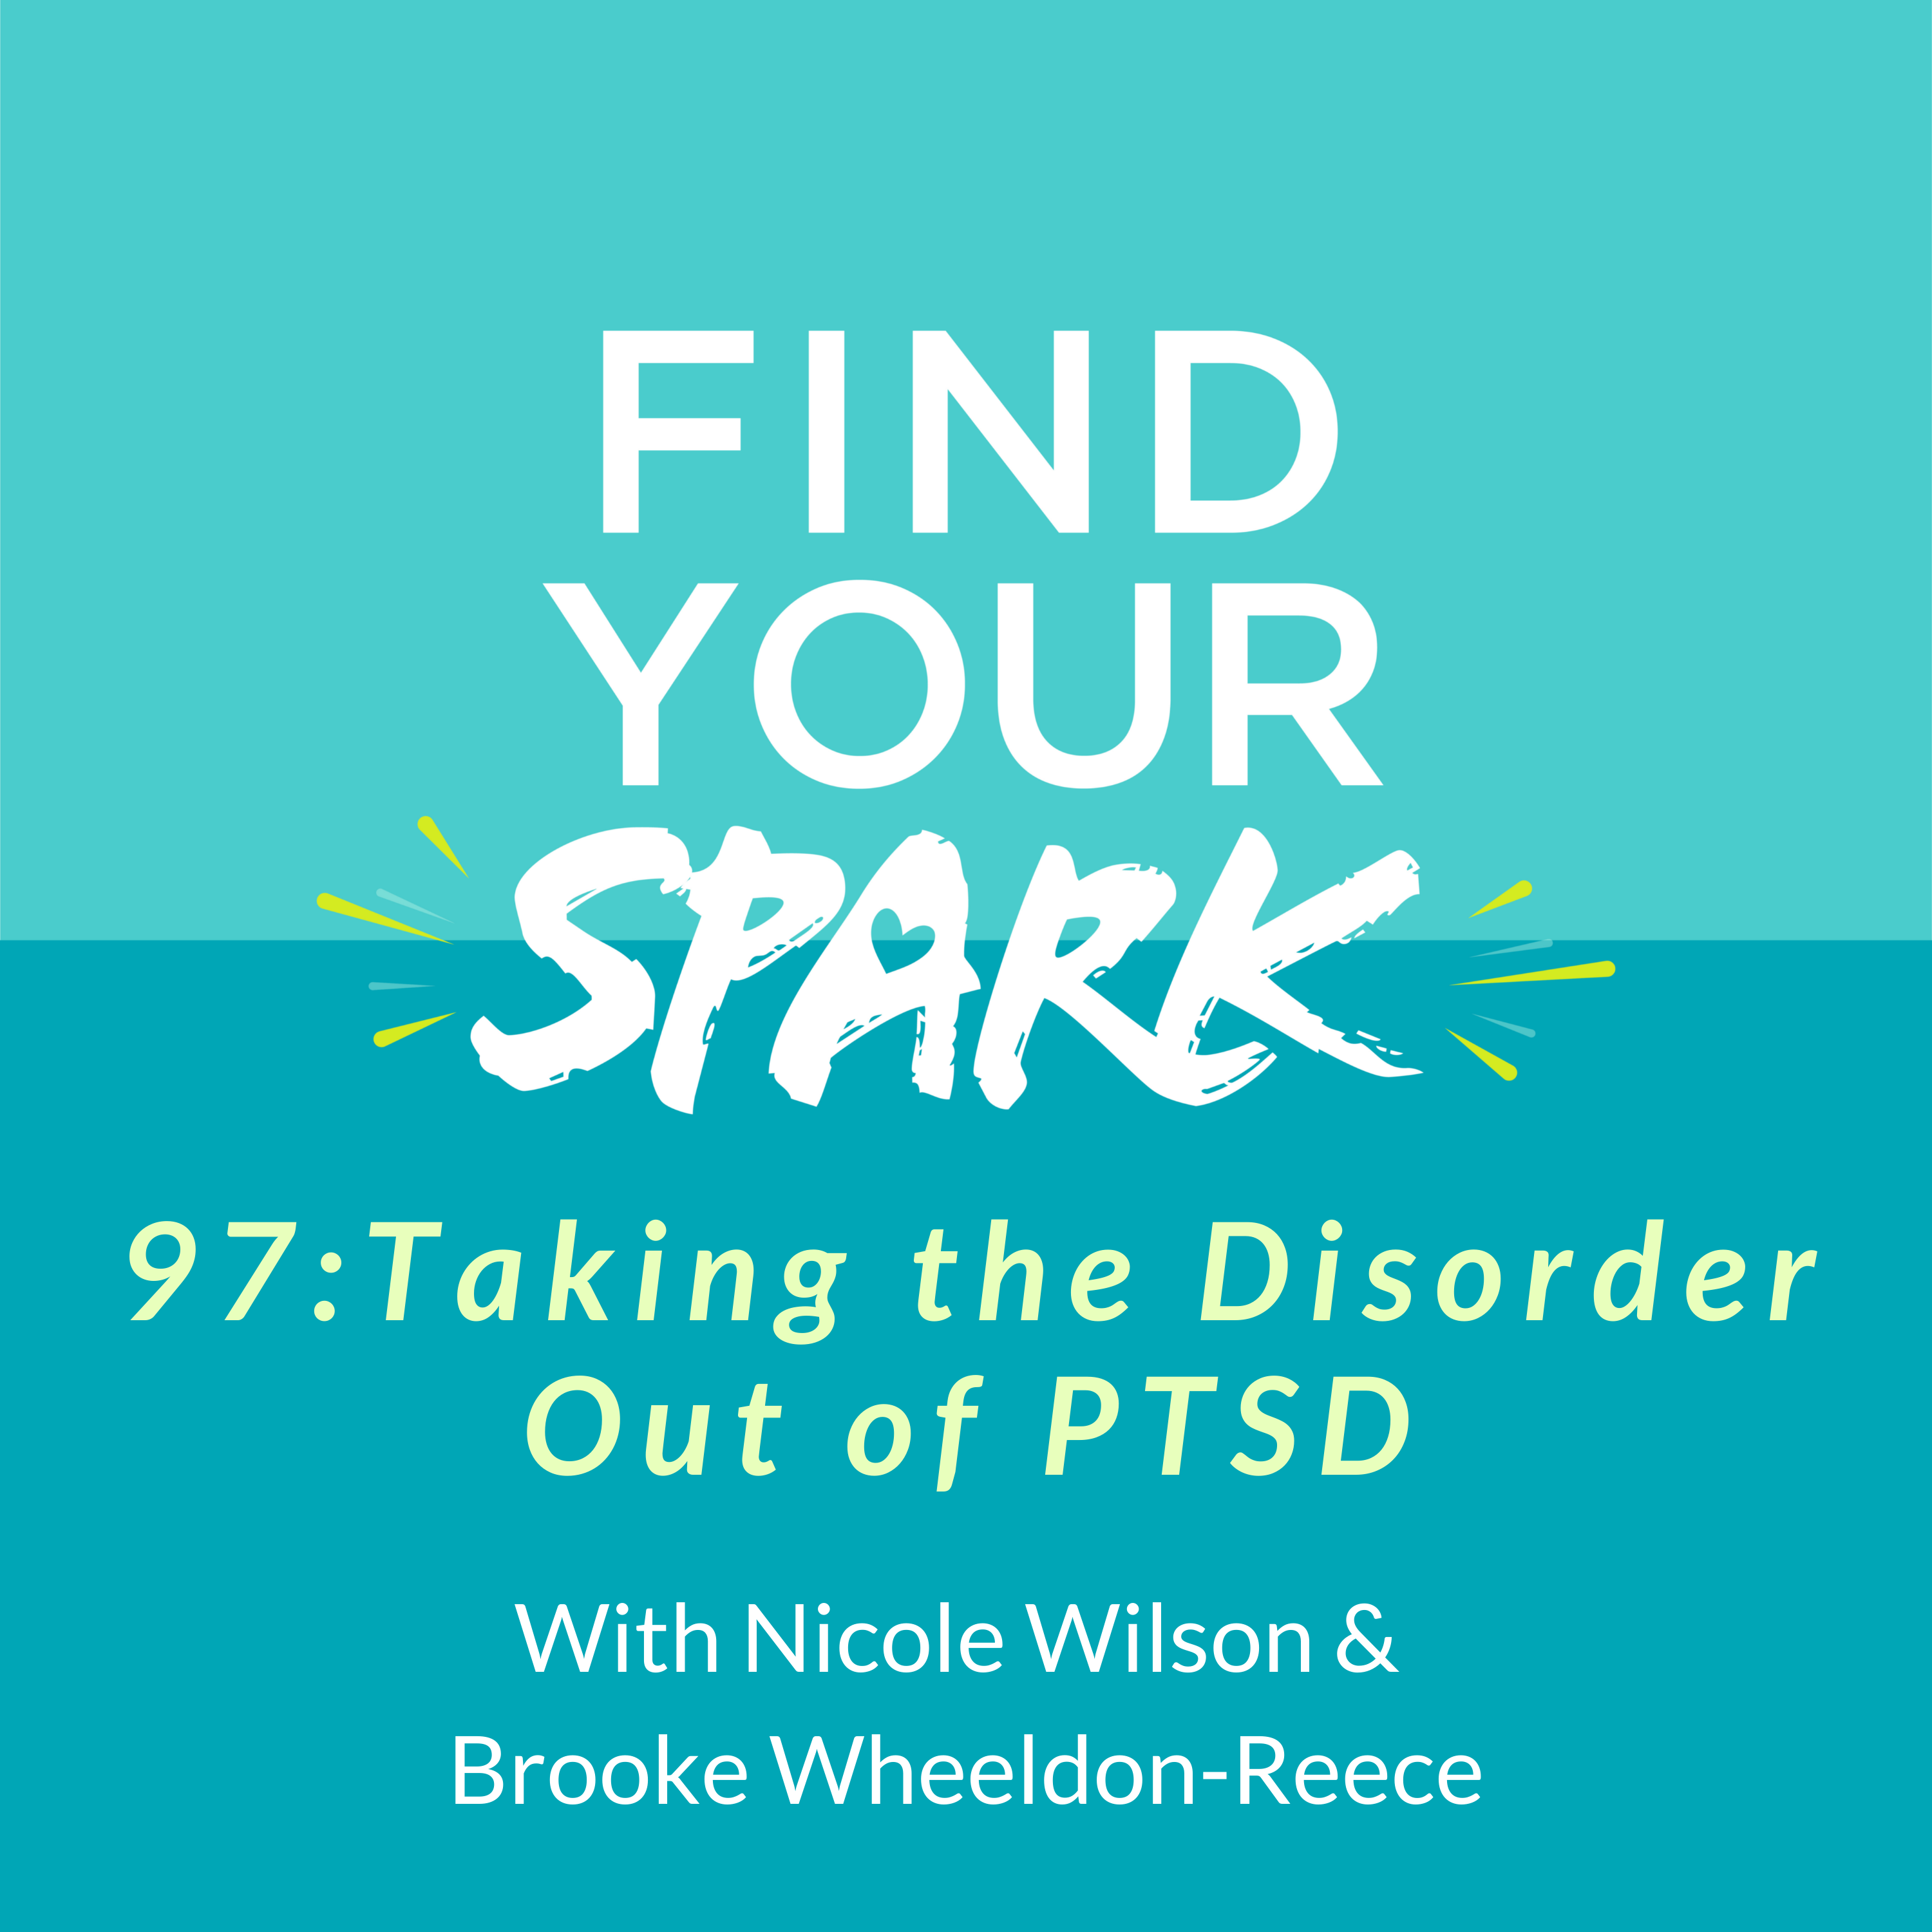 Taking the Disorder Out of PTSD